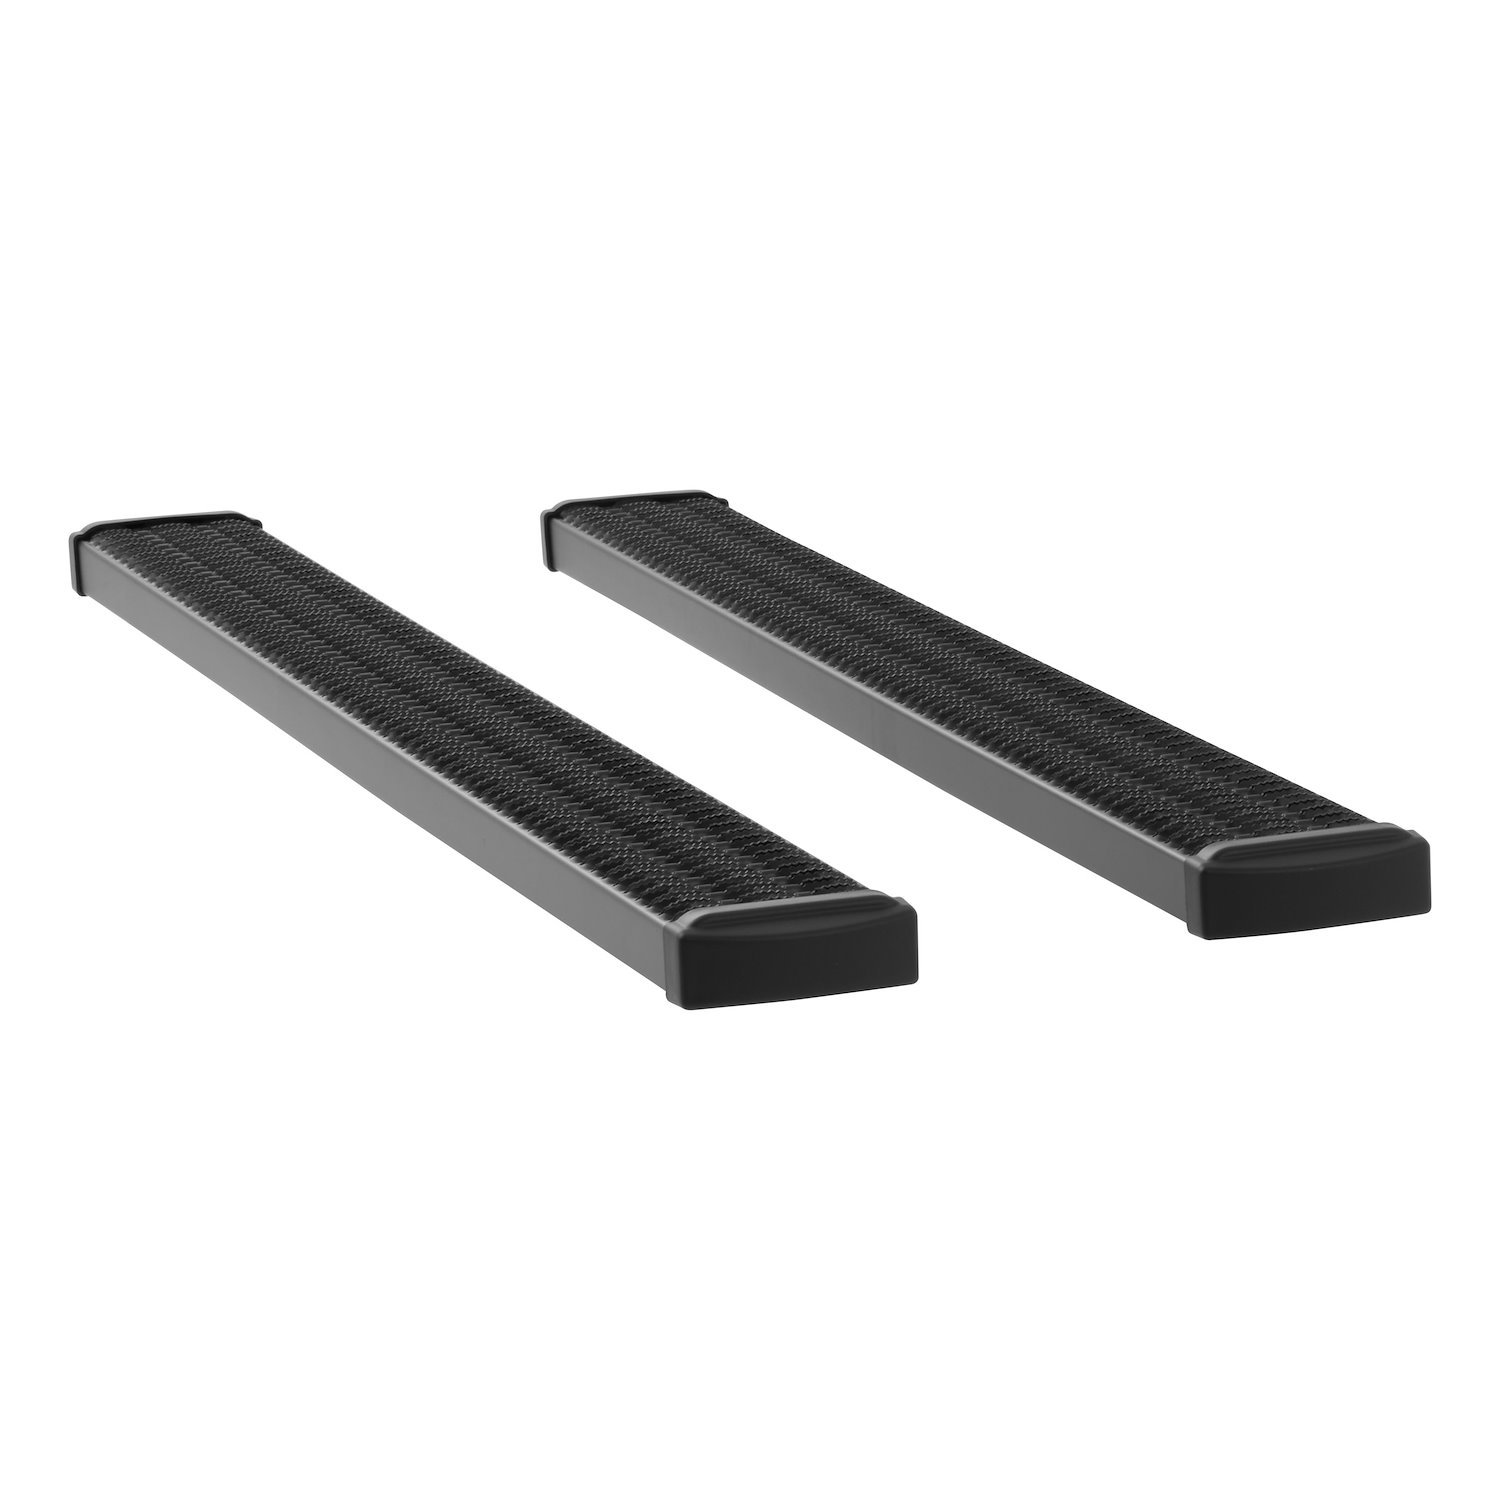 415078-401445 Grip Step 7 in. x 78 in. Black Aluminum Running Boards Fits Select Chevy Silverado, GMC Sierra